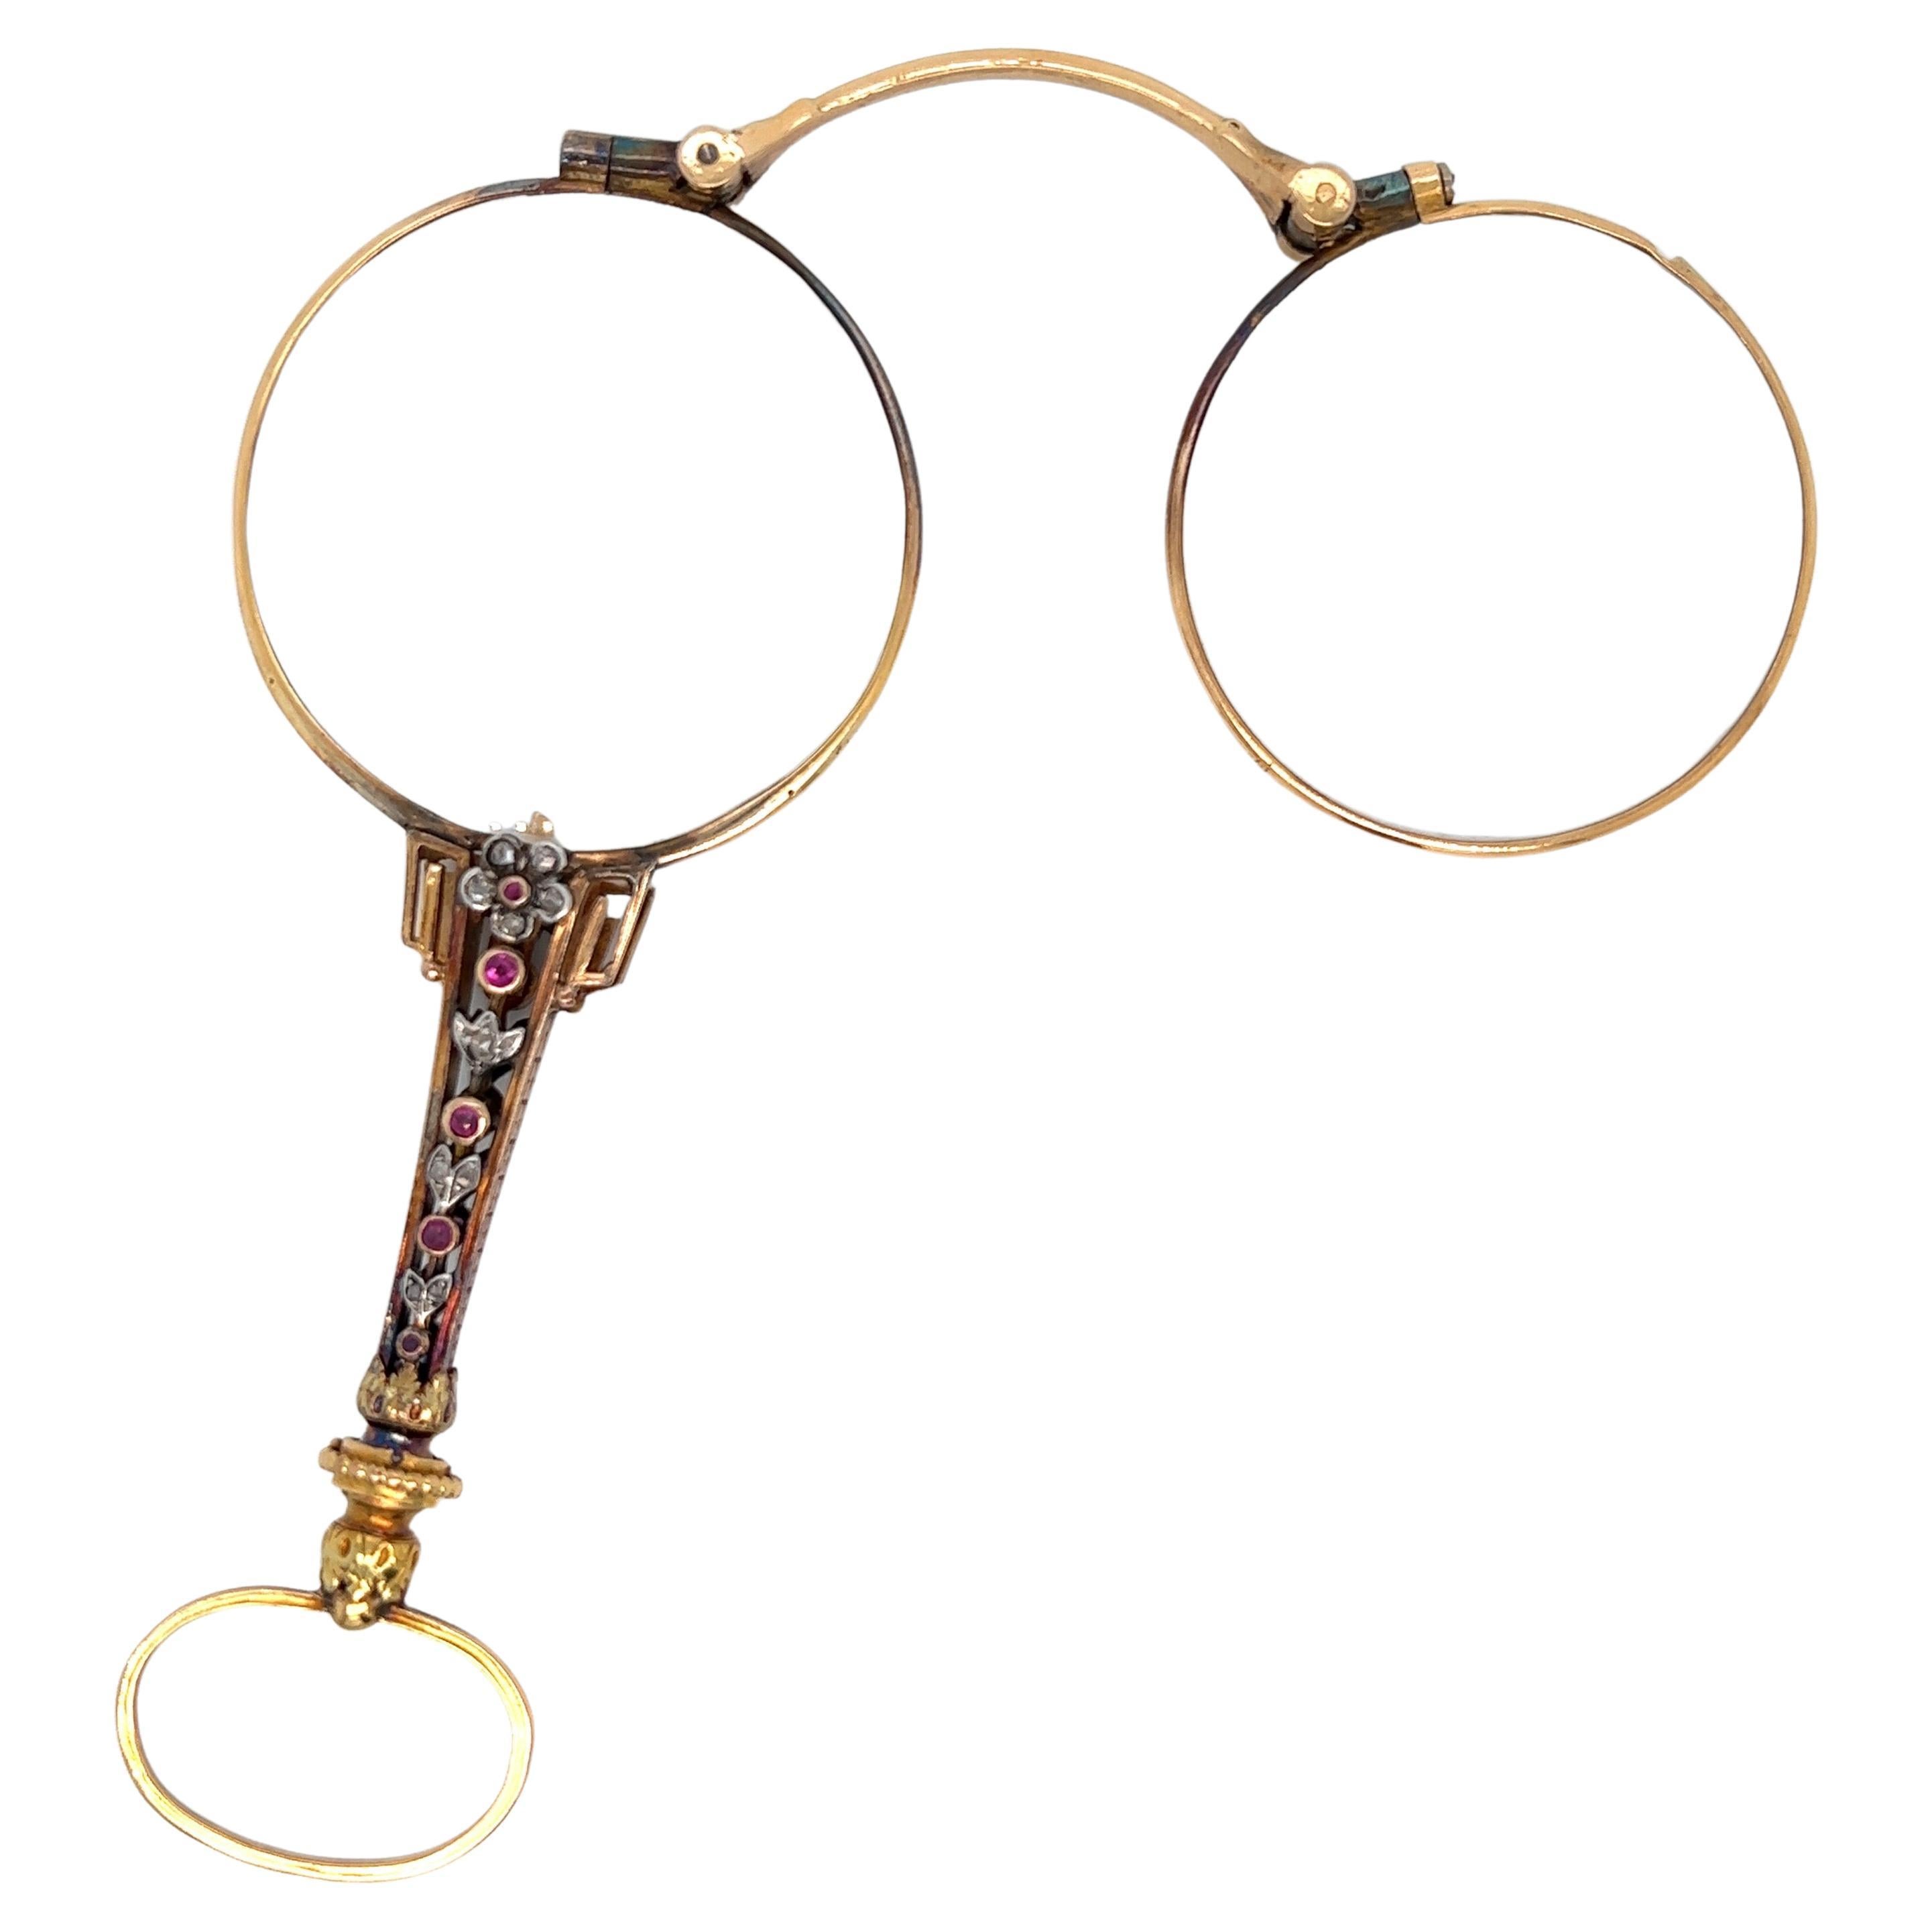 Antique French Yellow Gold & Jeweled Lorgnette